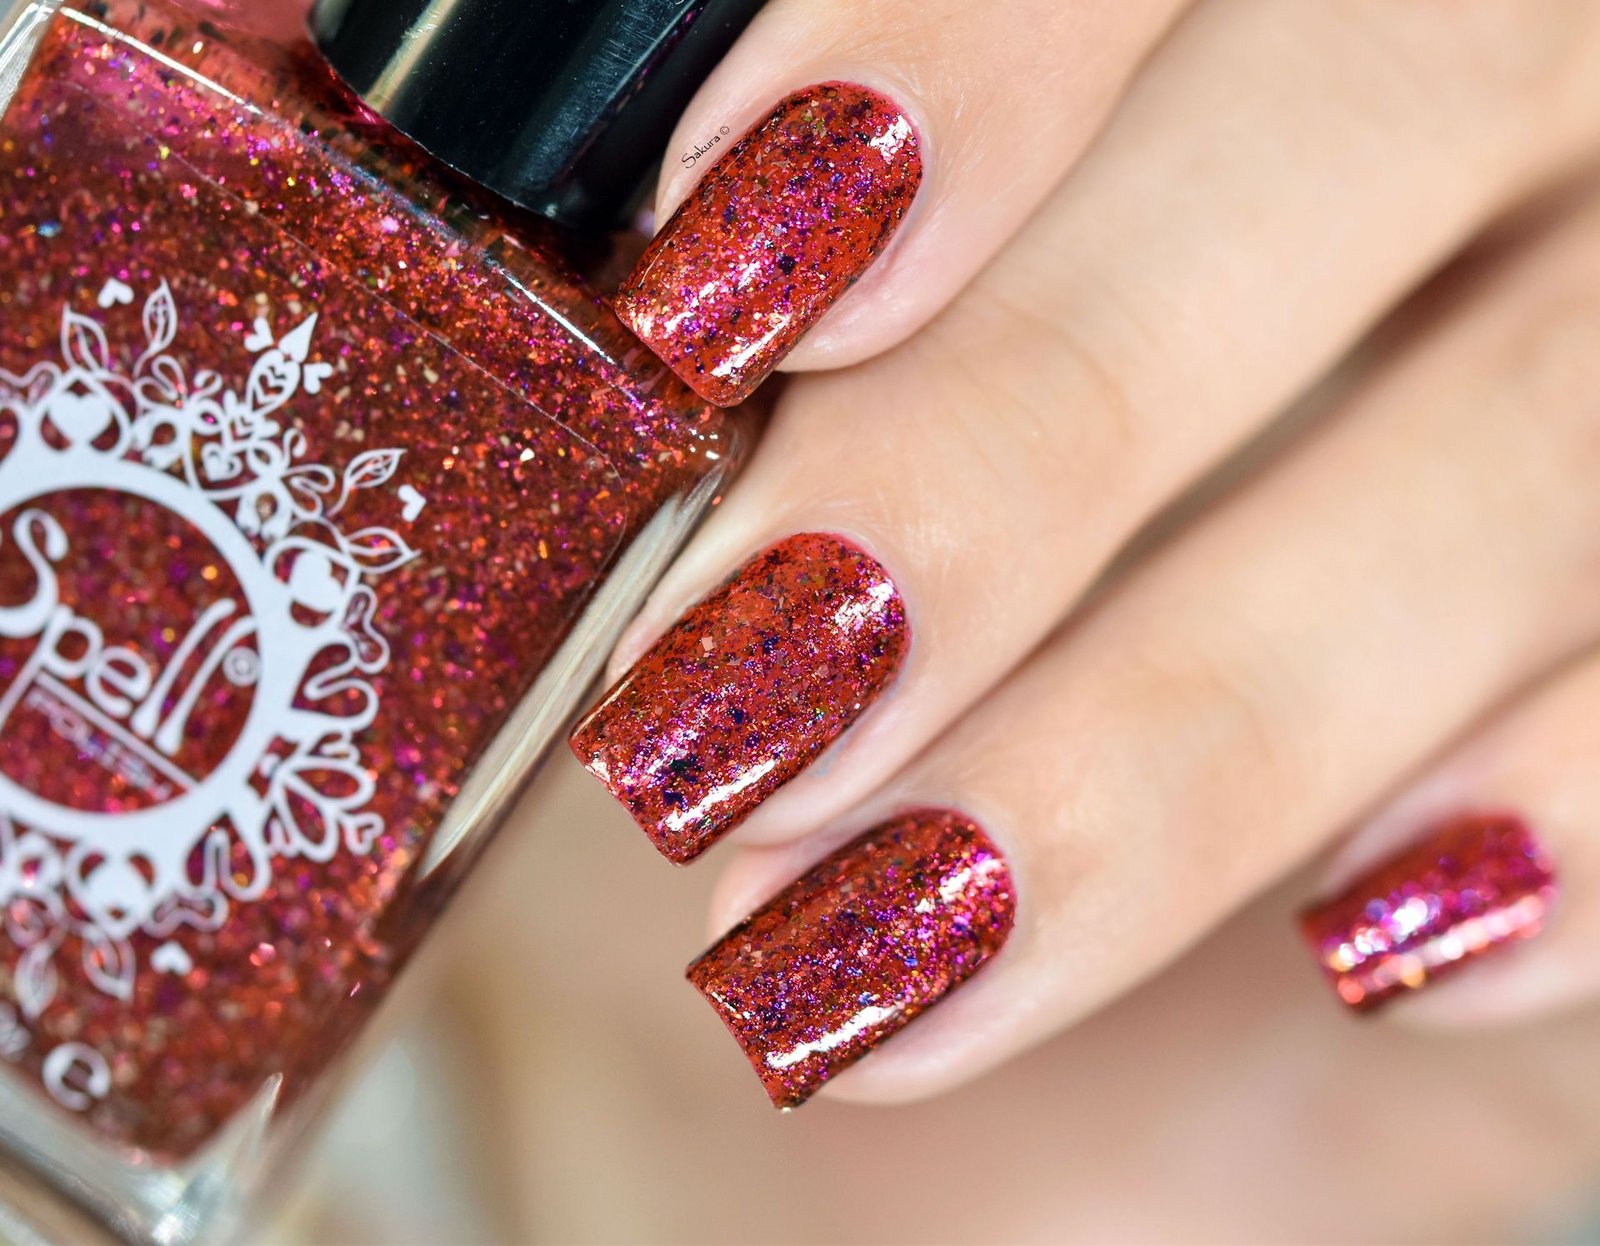 Sparkly Ruby Red Nail Art for a Flashy Fresh Look